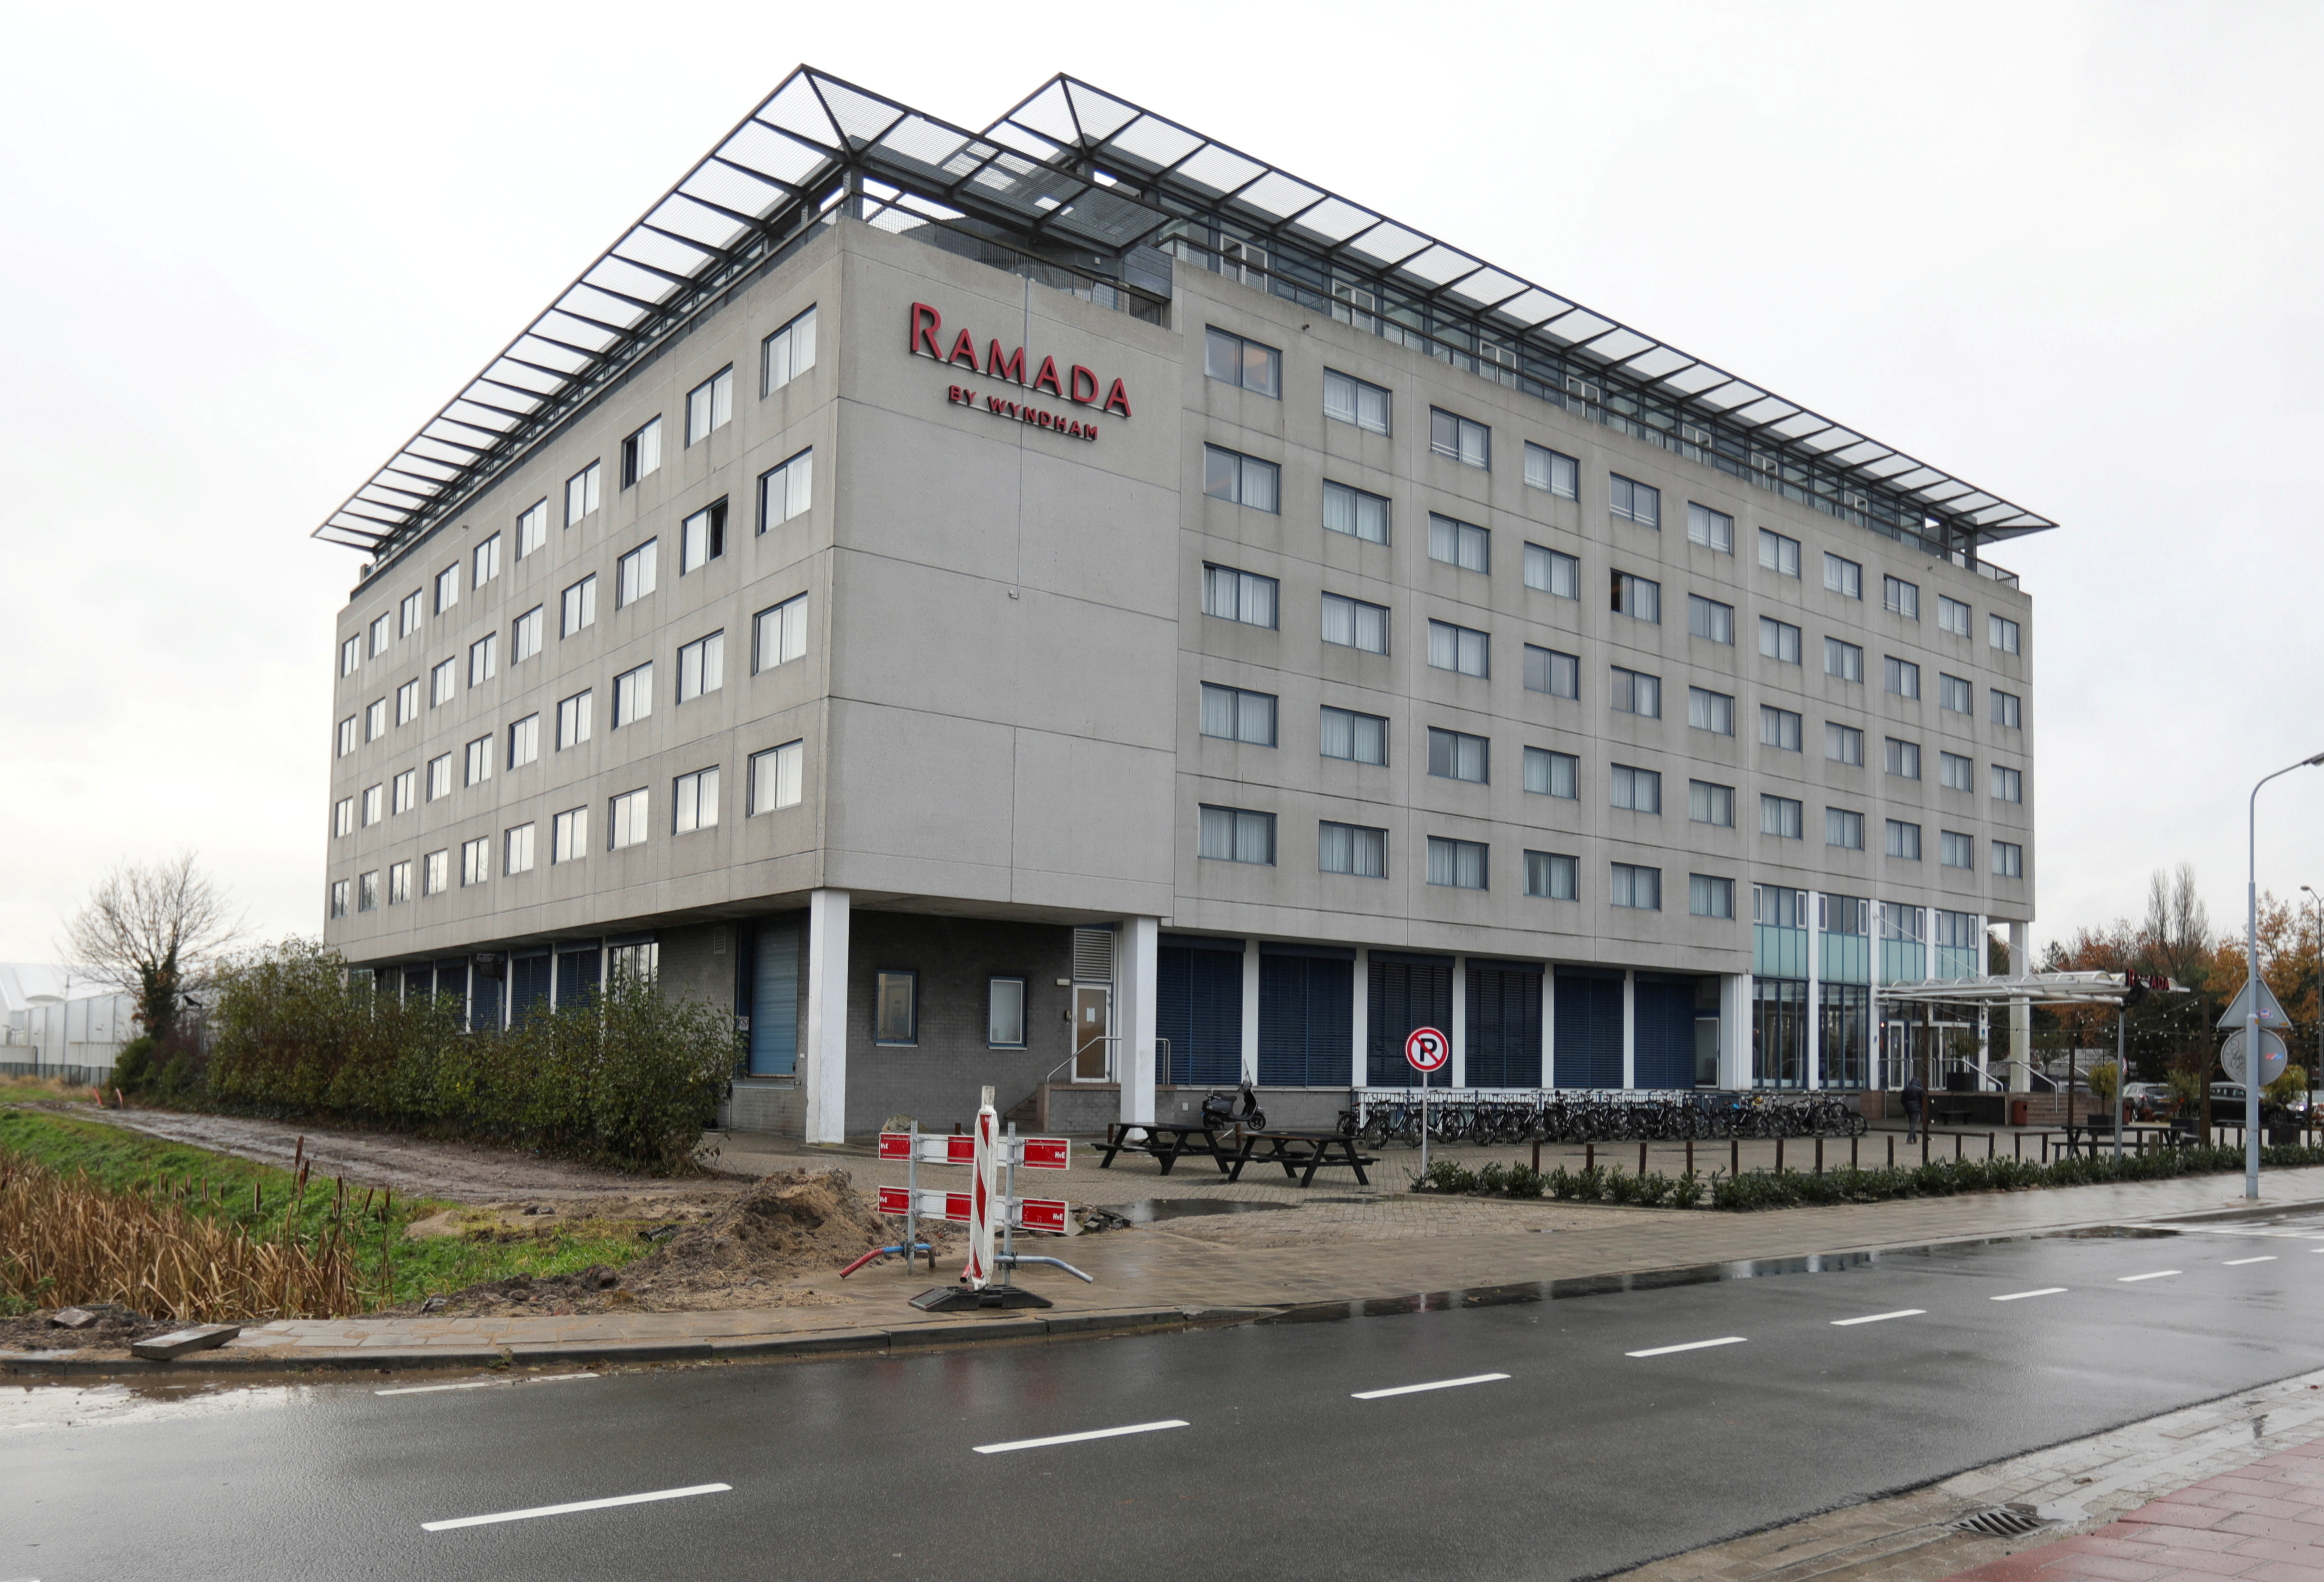 A general view of the Hotel Ramada which is located close to Schiphol Airport in Amsterdam, Netherlands, November 27, 2021. REUTERS/Eva Plevier 